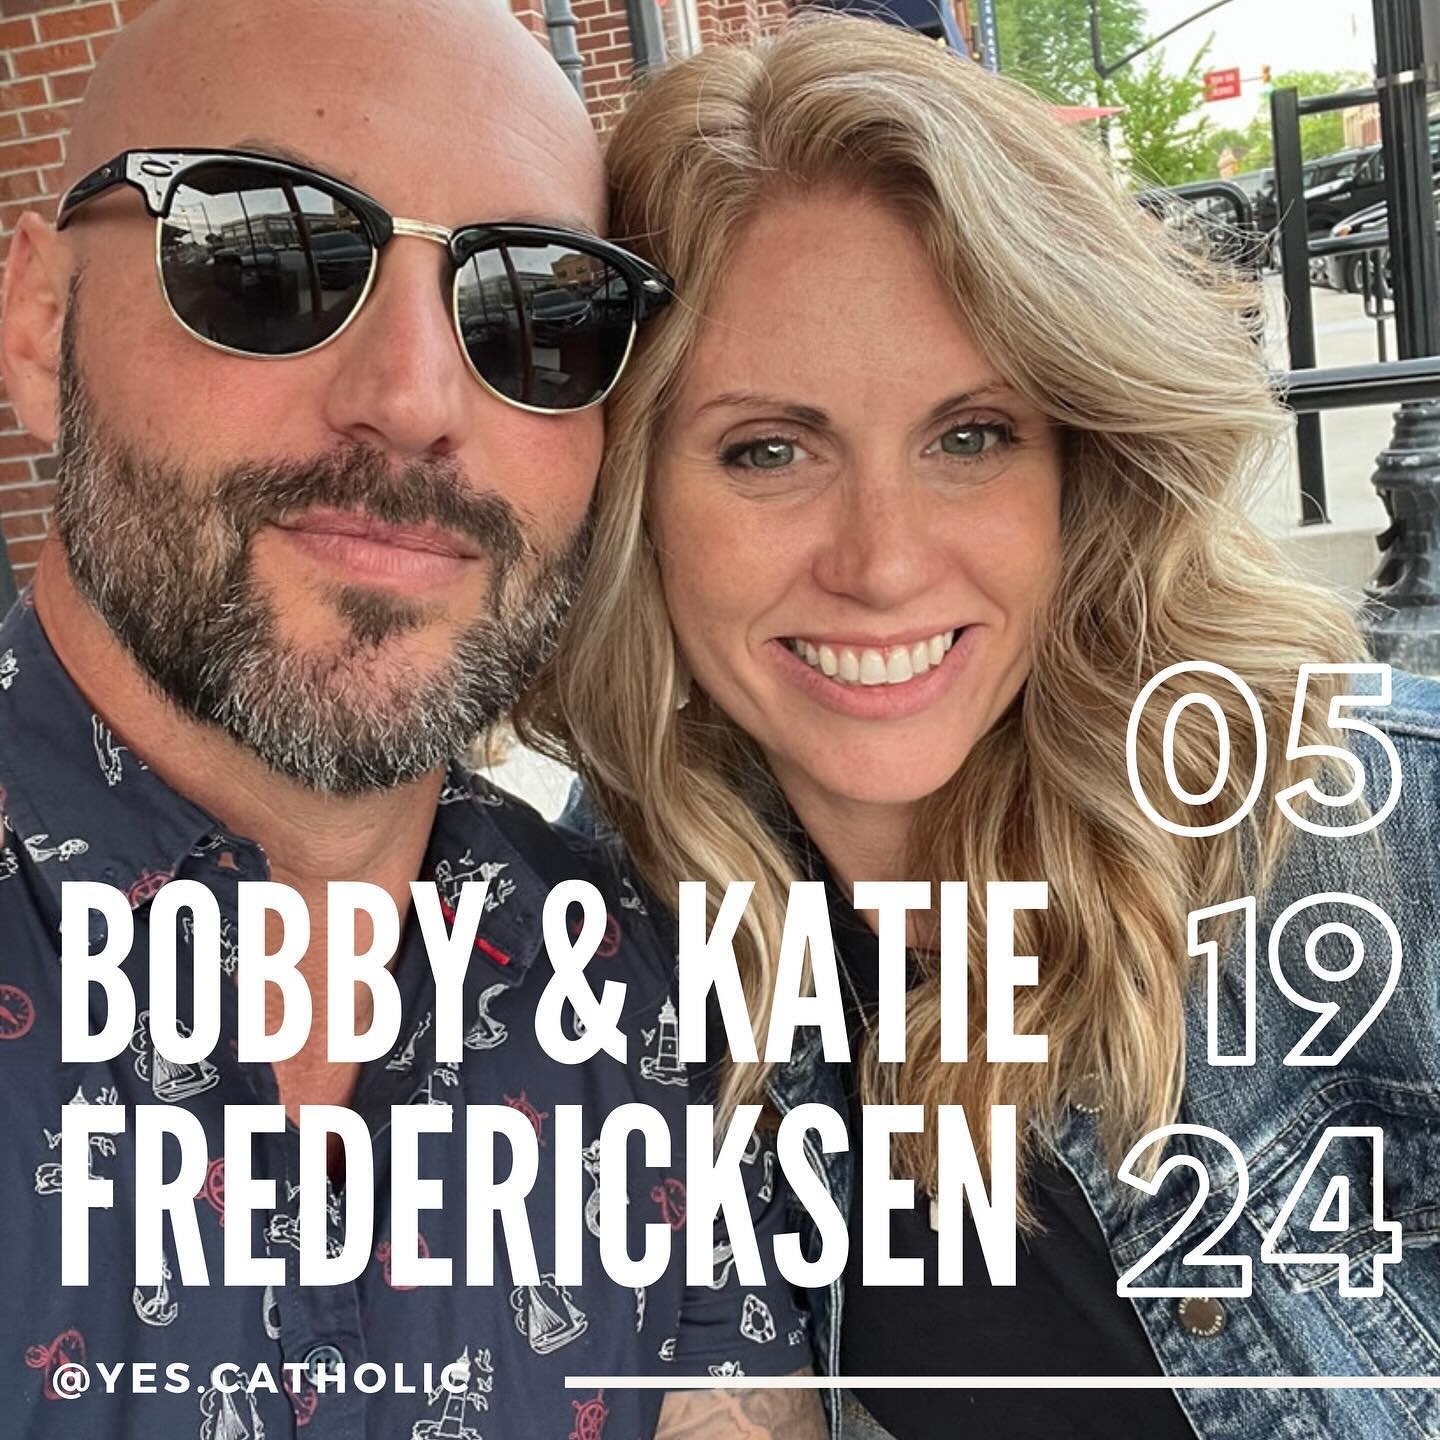 Meet Bobby and Katie Fredericksen, The Catholic Couple, on a mission to spread the love of Jesus by normalizing Catholicism.&nbsp; Married 13 years with two beautiful children, Bobby and Katie have a passion for sharing the Catholic faith. Bobby&rsqu